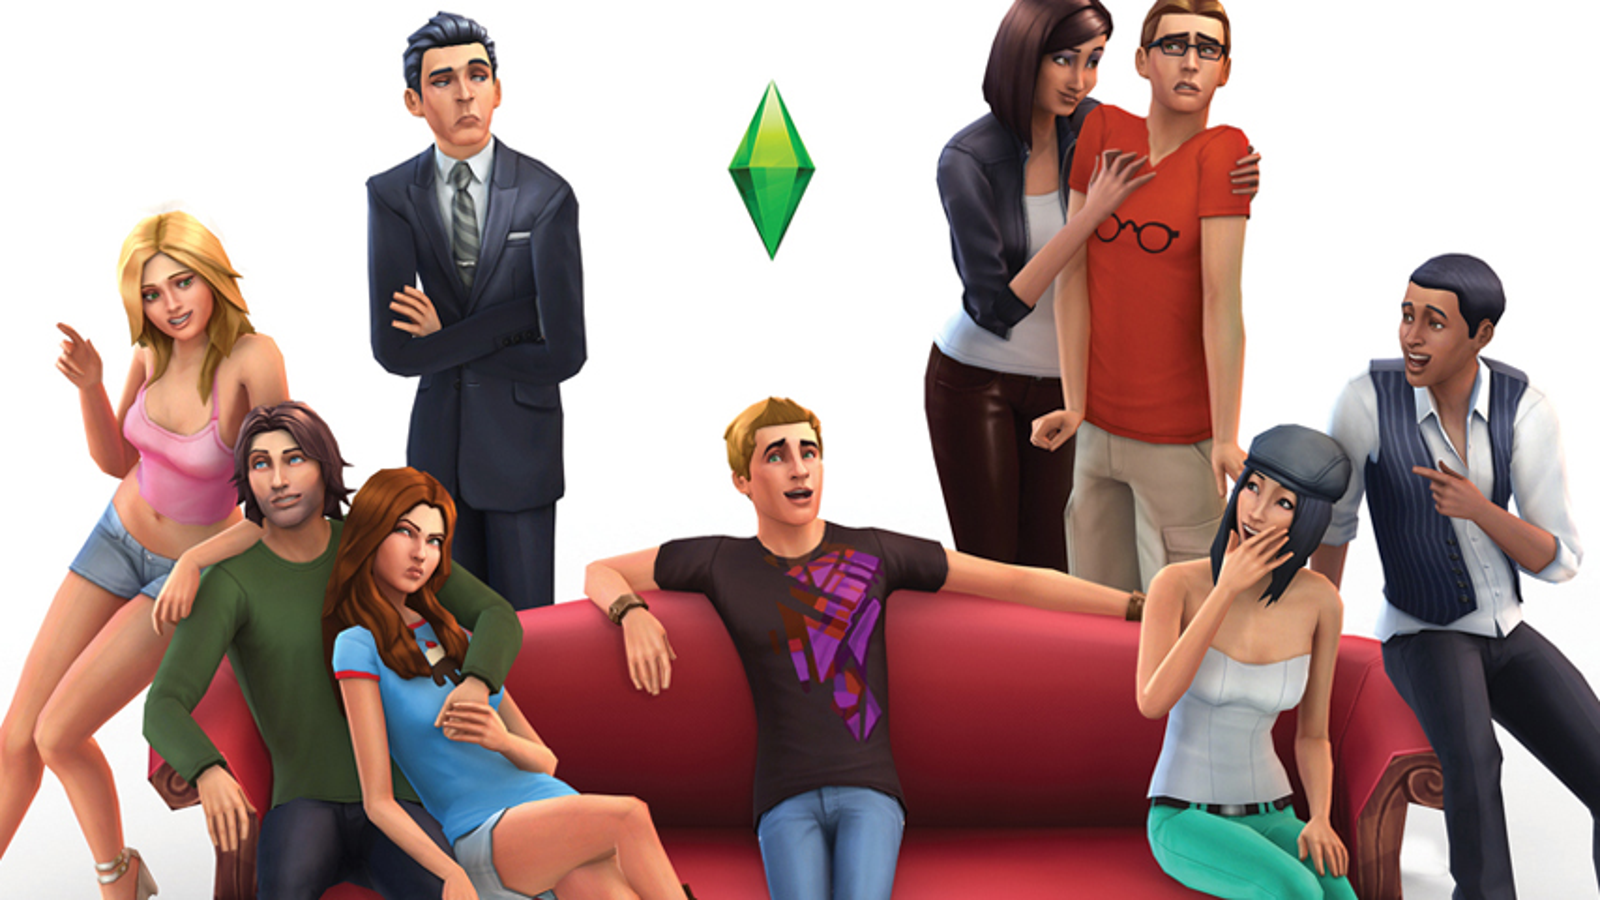 The Sims 4 free content packs offered on Epic Games Store this